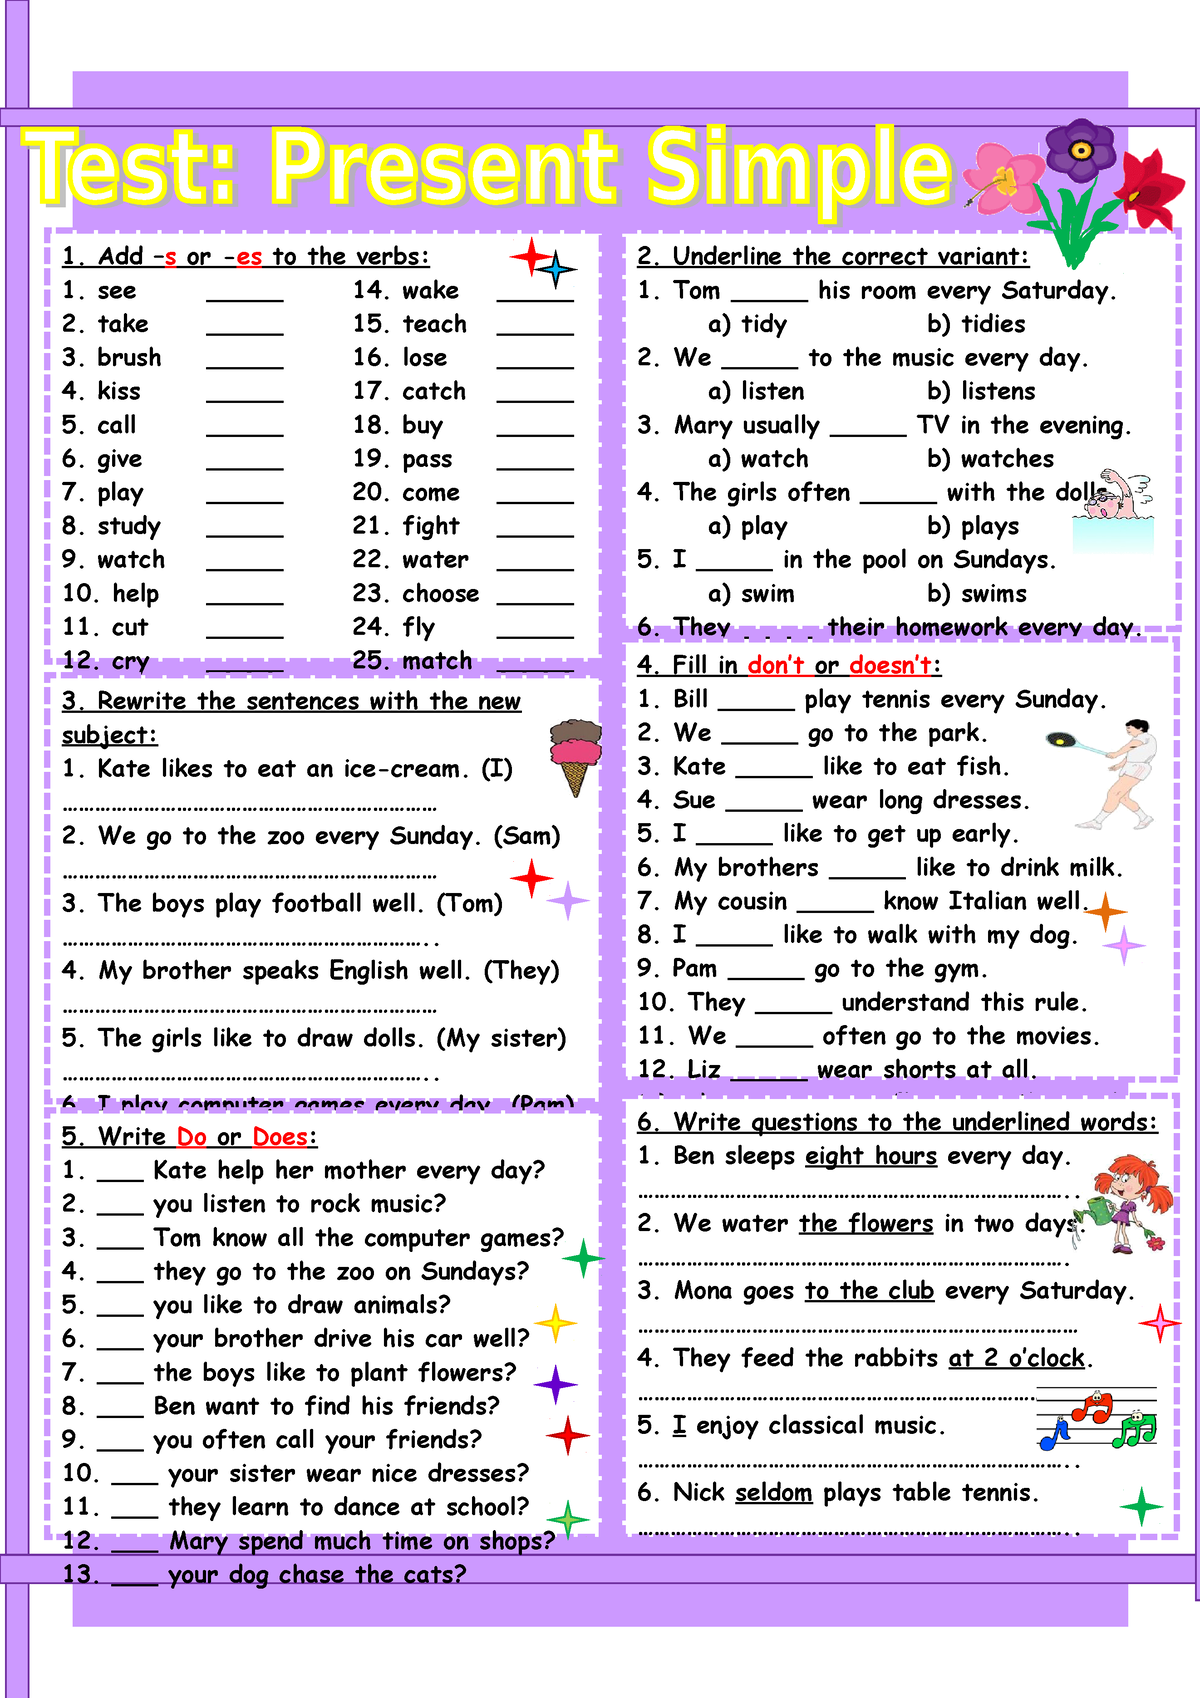 test-present-simple-for-10th-graders-add-s-or-es-to-the-verbs-see